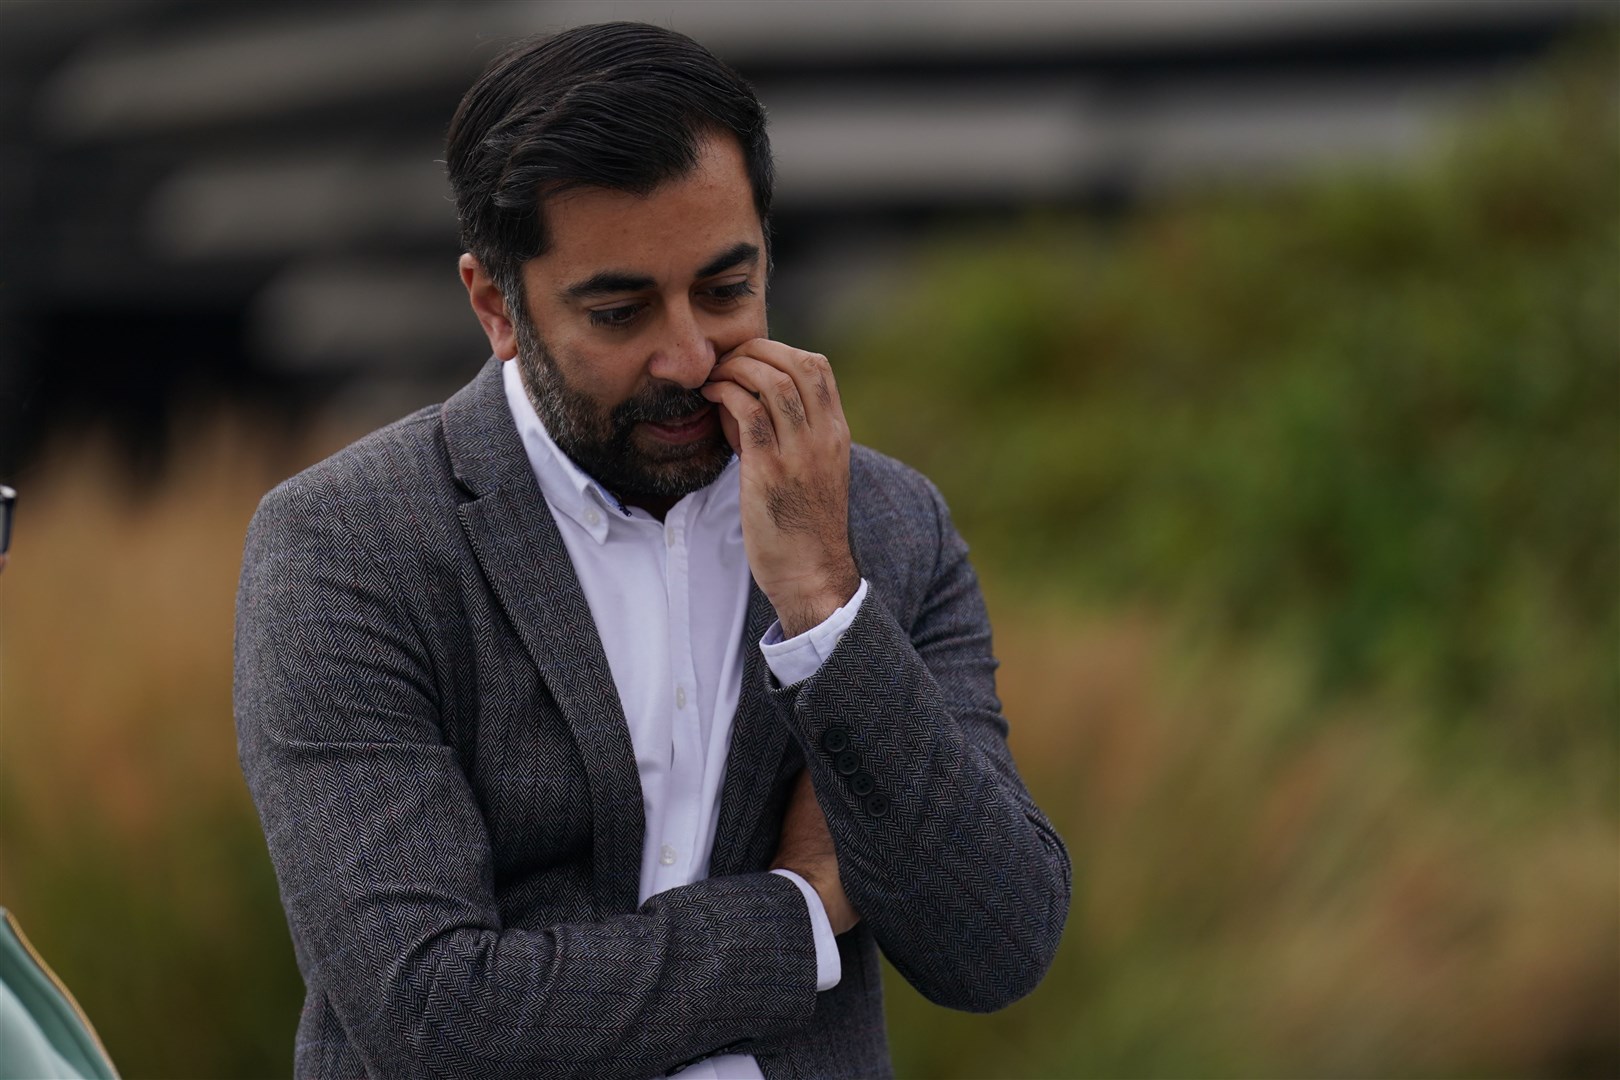 Humza Yousaf said the SNP will regroup following the heavy by-election defeat (Andrew Milligan/PA)